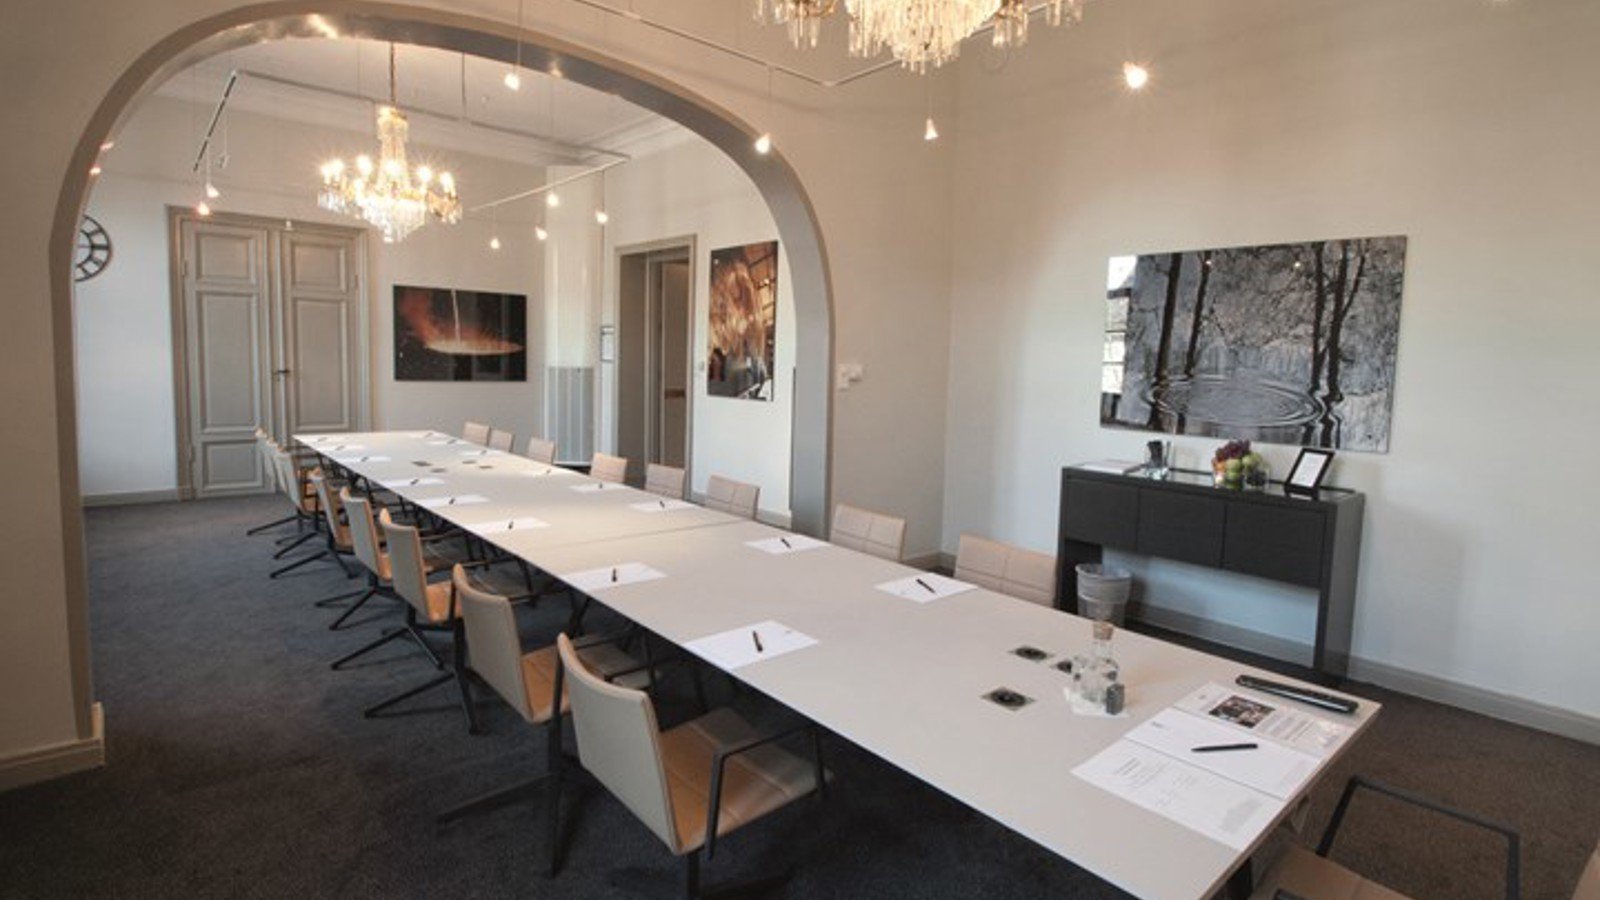 Conference room with board seating, white walls and crystal chandeliers